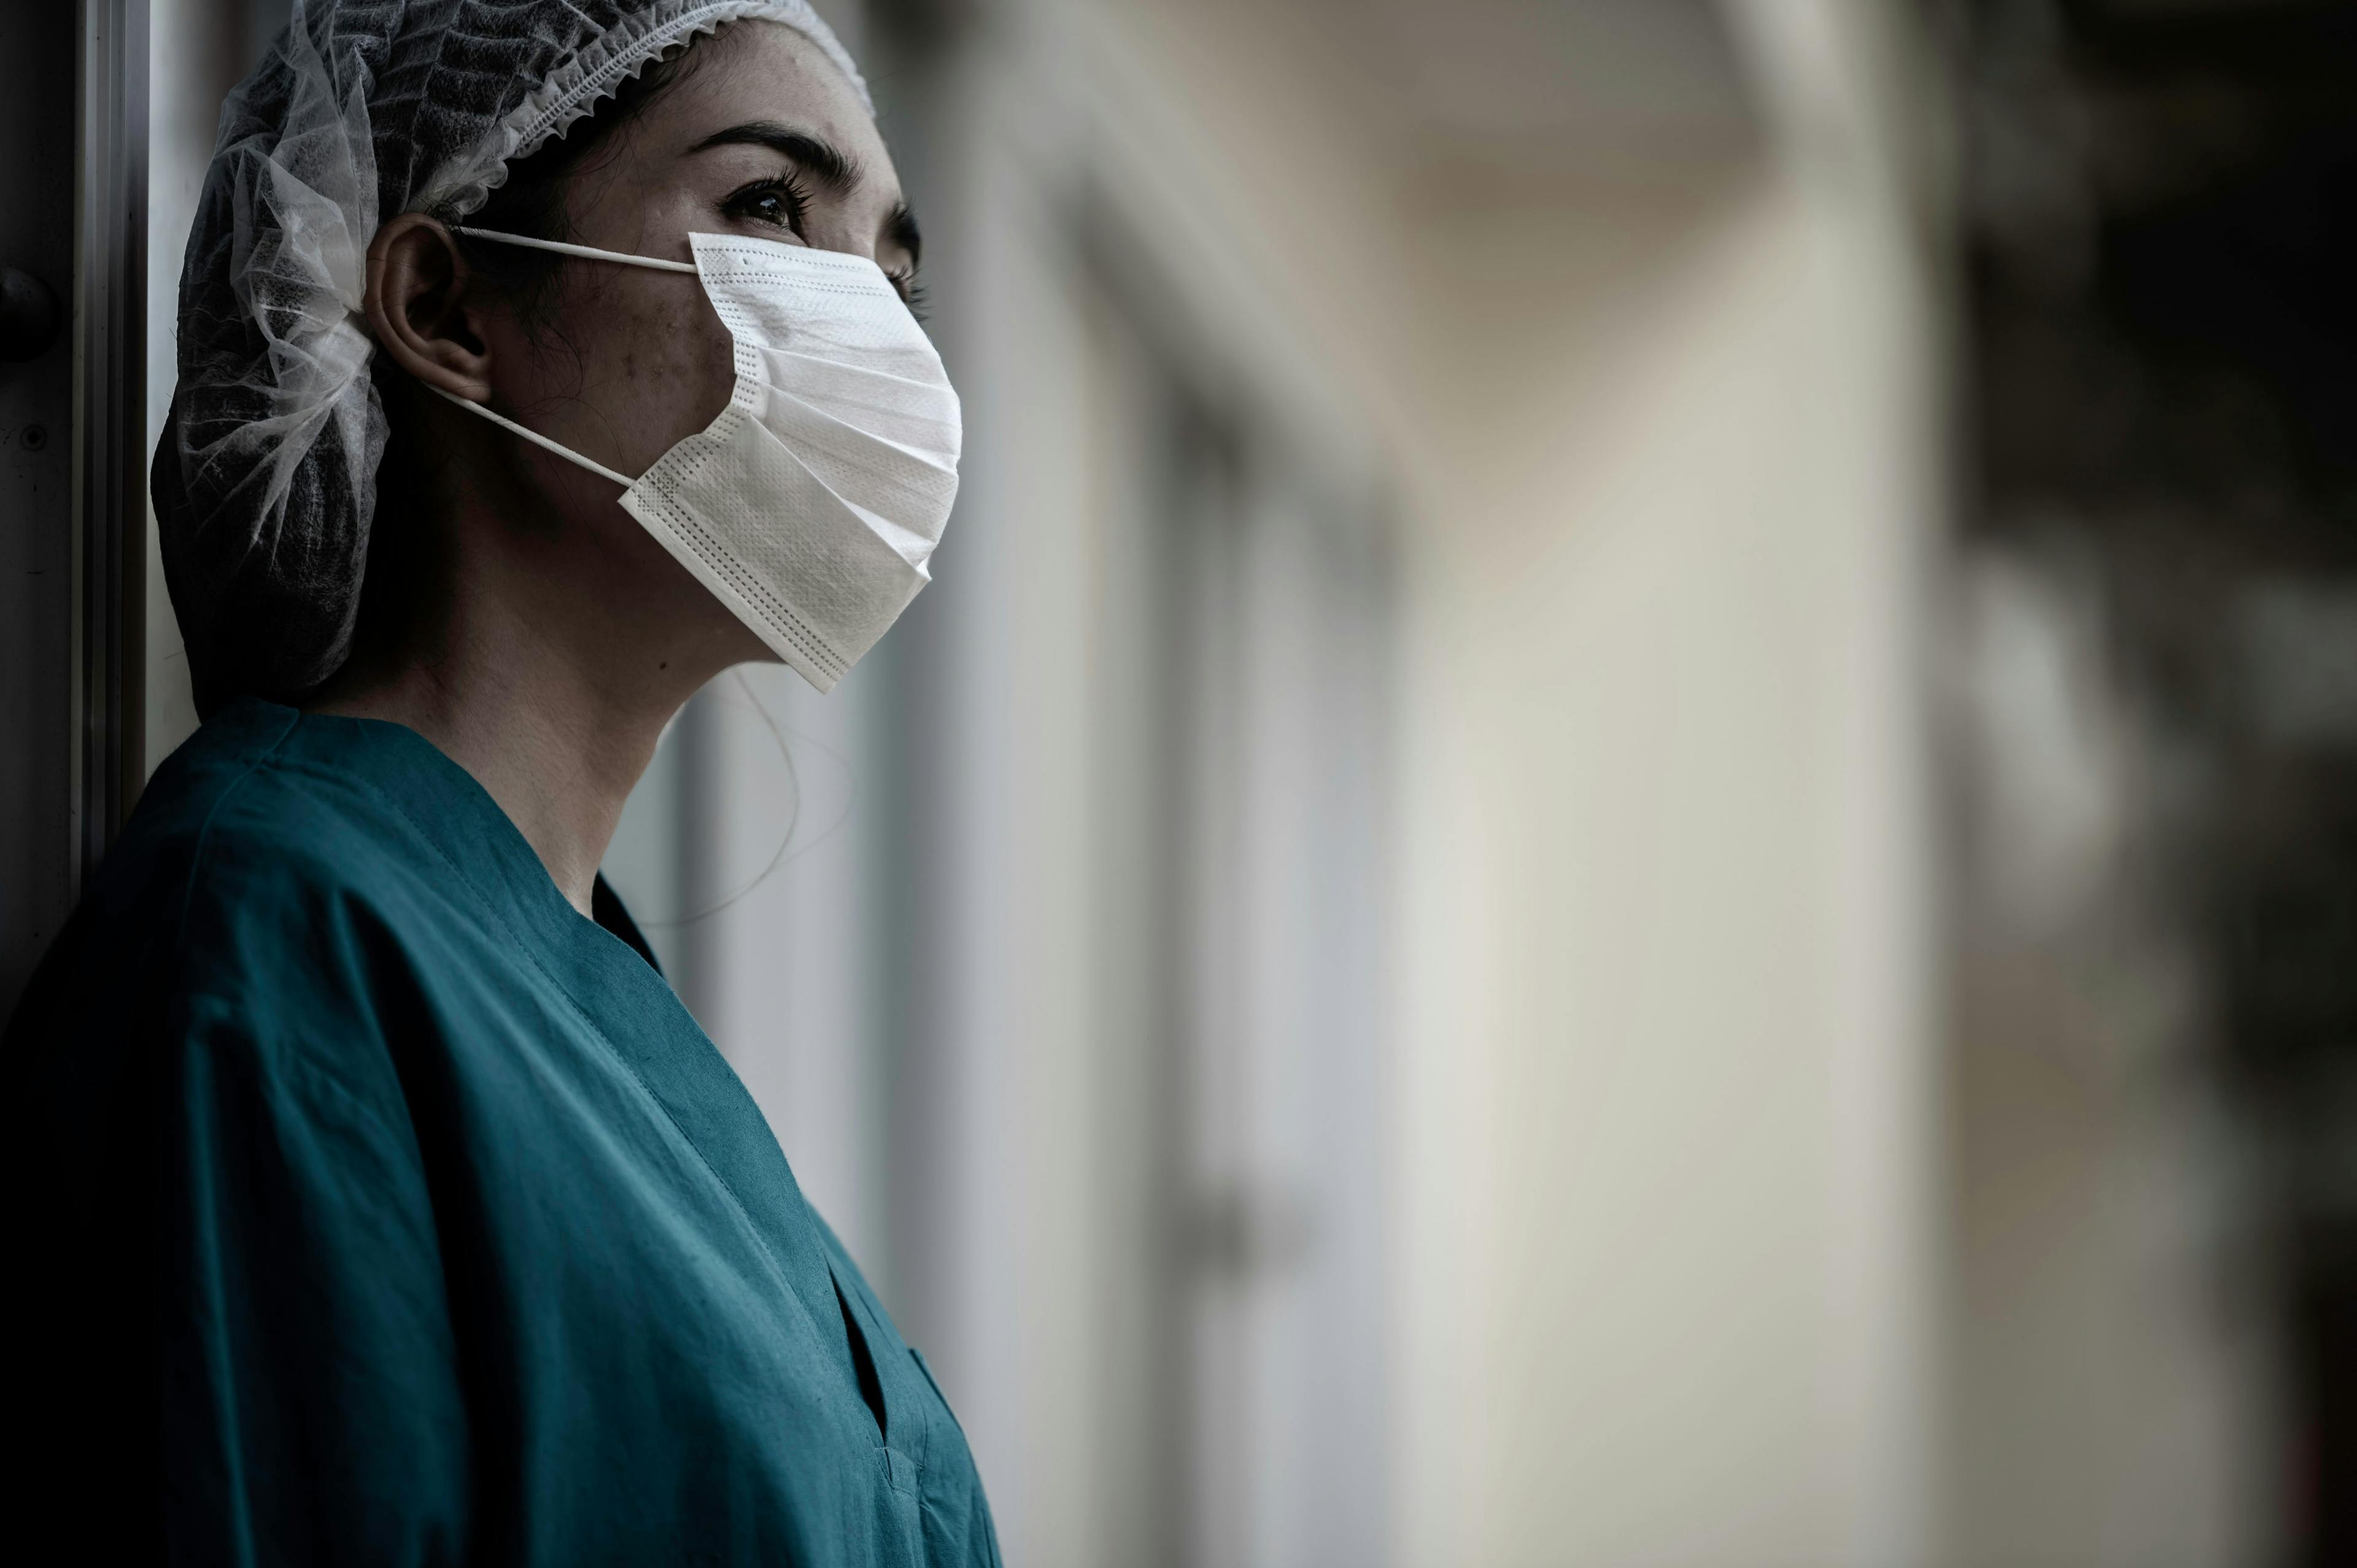 Reducing burnout in doctors: Focus on fixing the workplace, not the worker